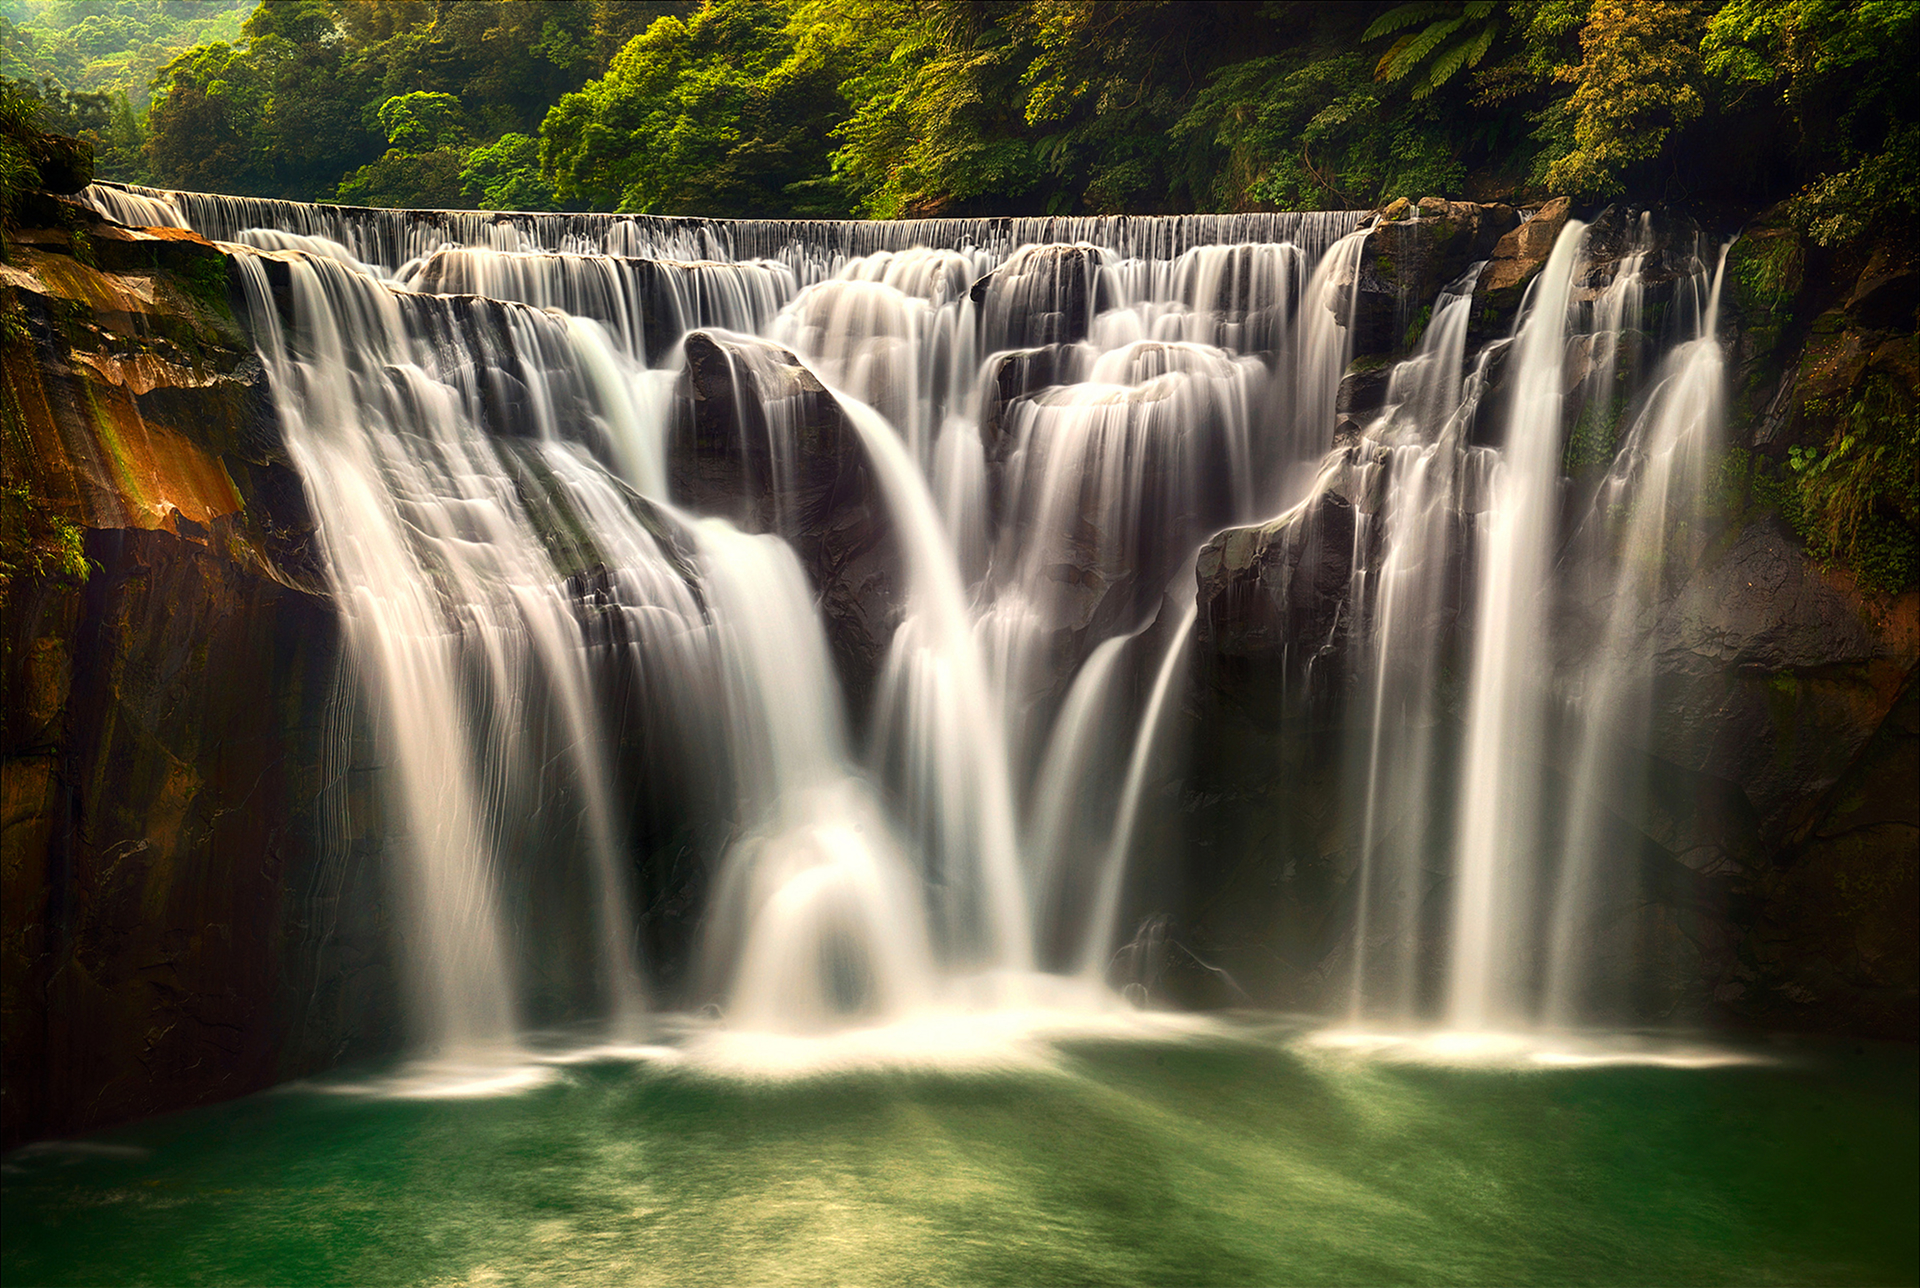 Waterfall in Thailand by Toonman Blchin